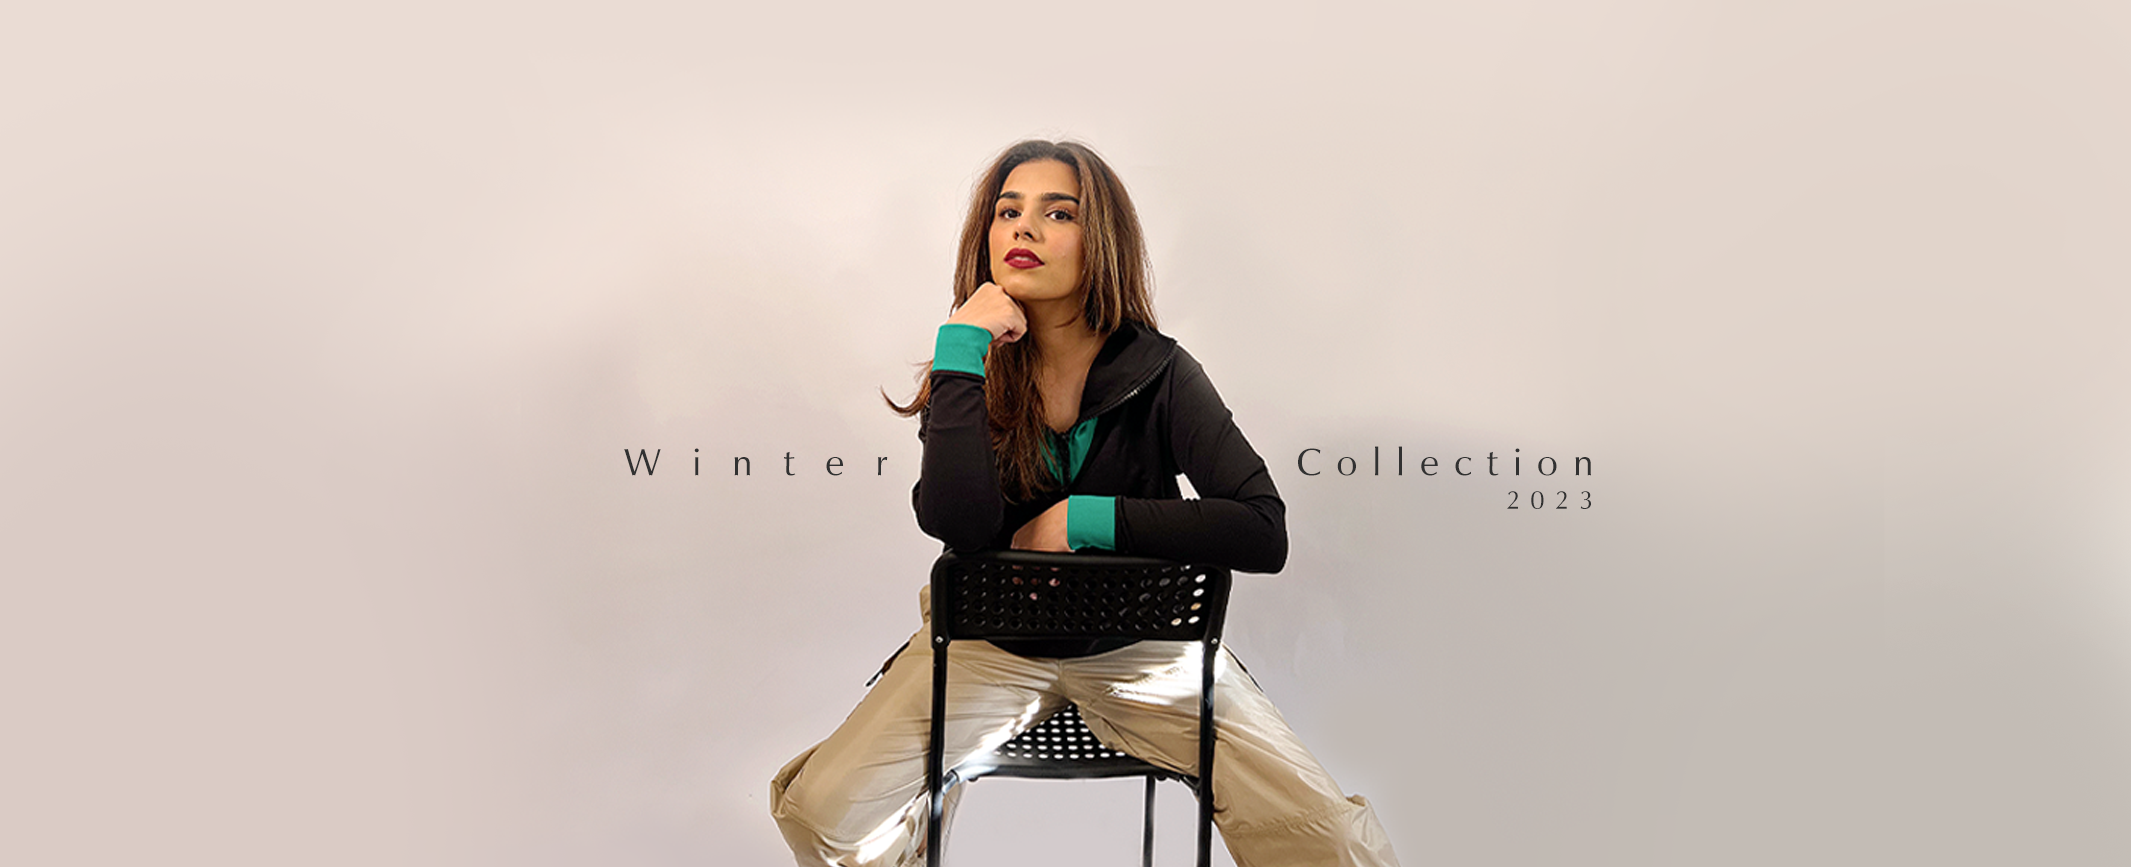 Winter Collection